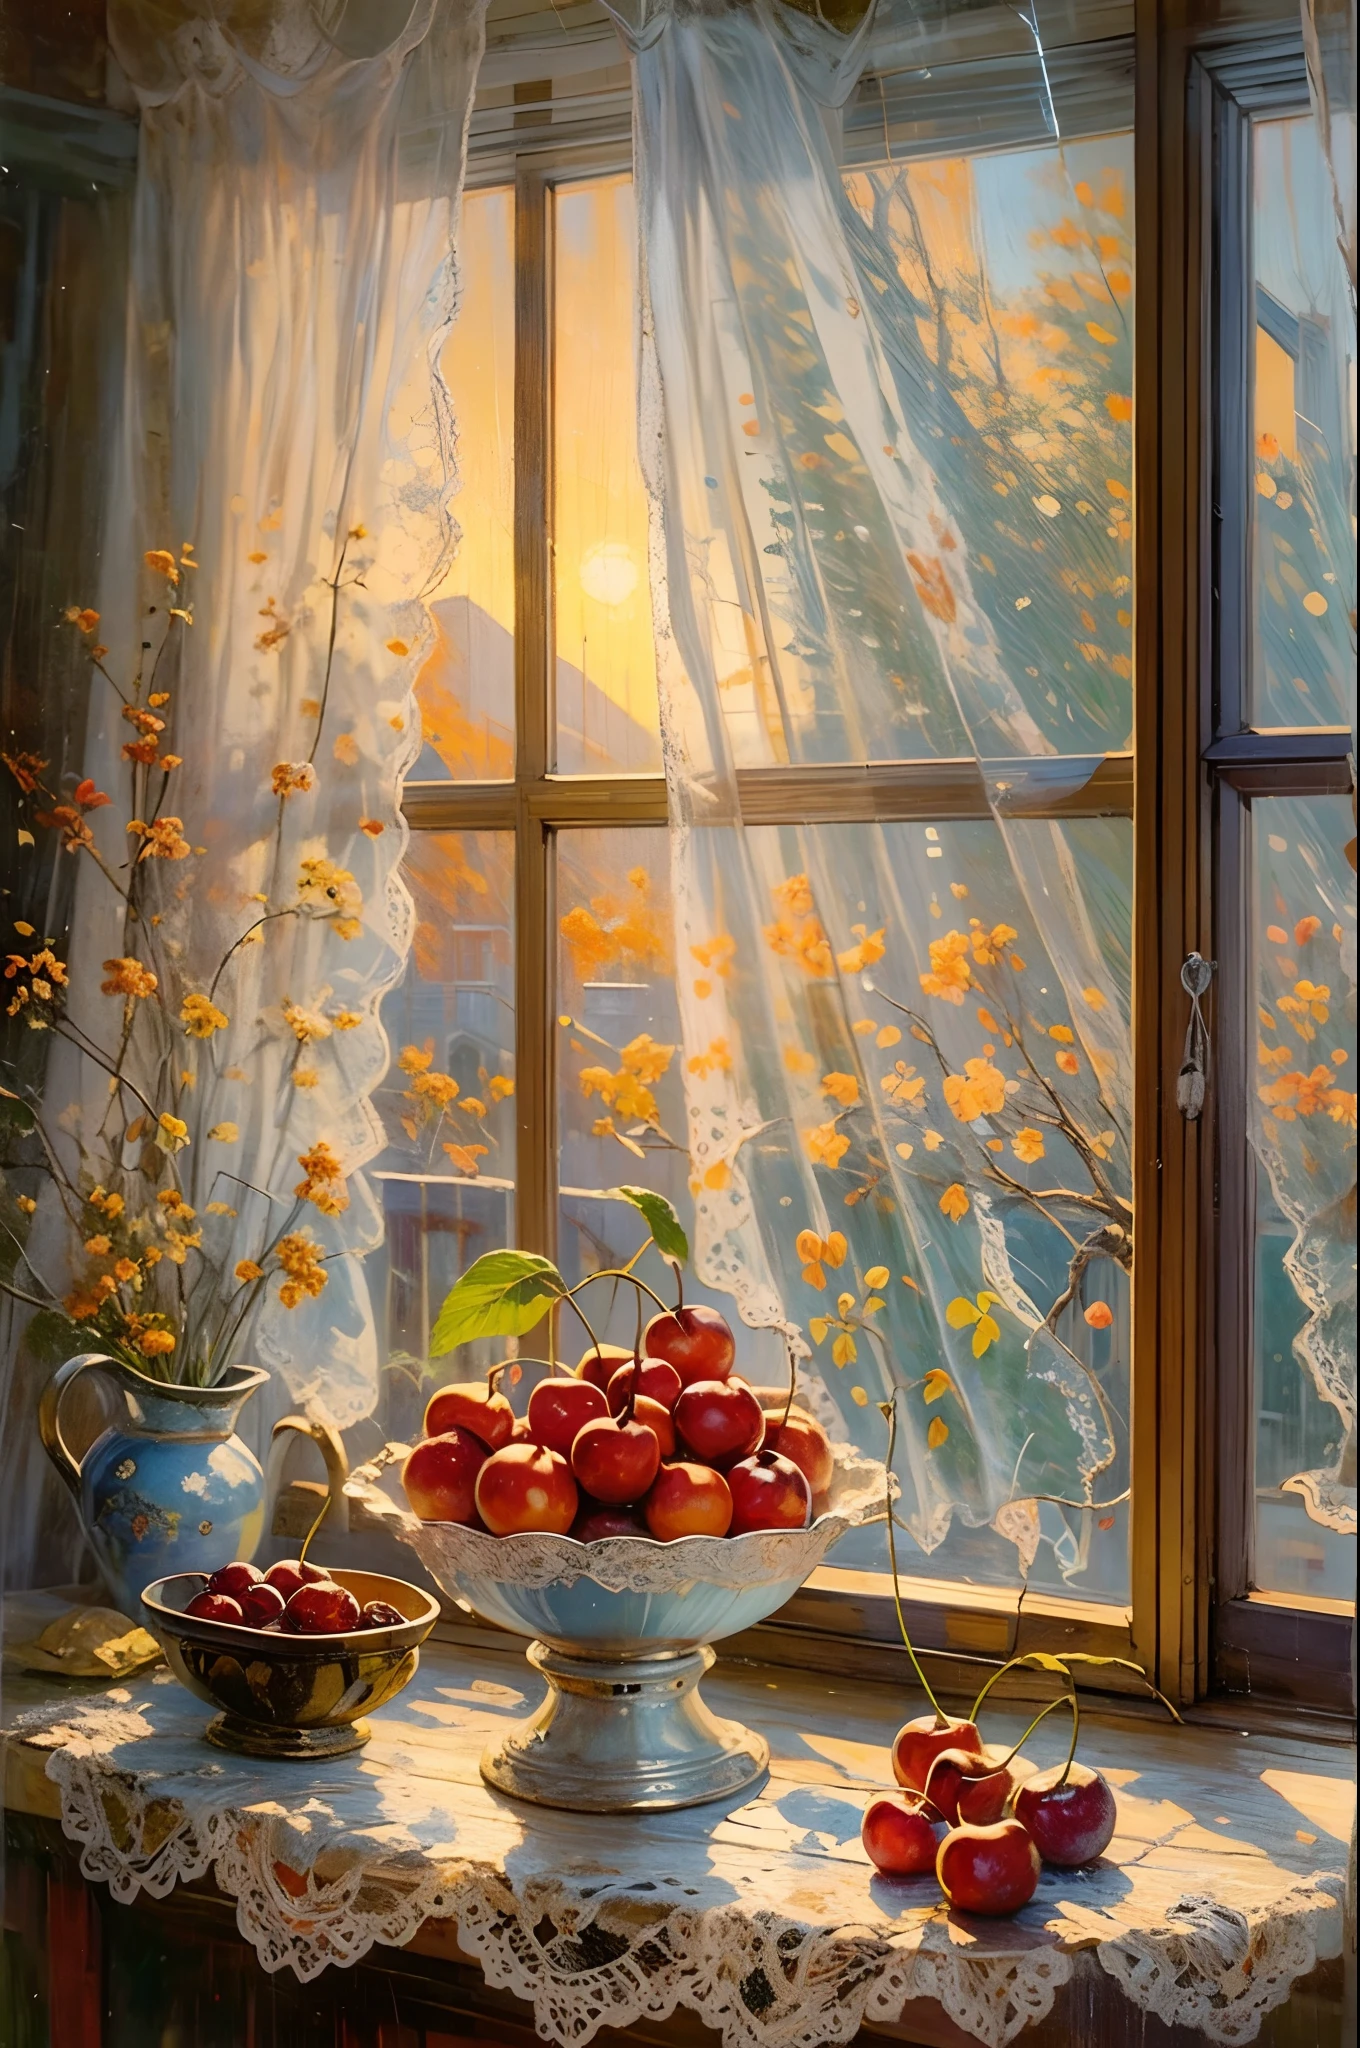 oil painting still life, vintage illustration of a window at the sunset, iridescent light, soft light, rain drops, lacy curtains, bowl of cherries, cherry, dynamic light